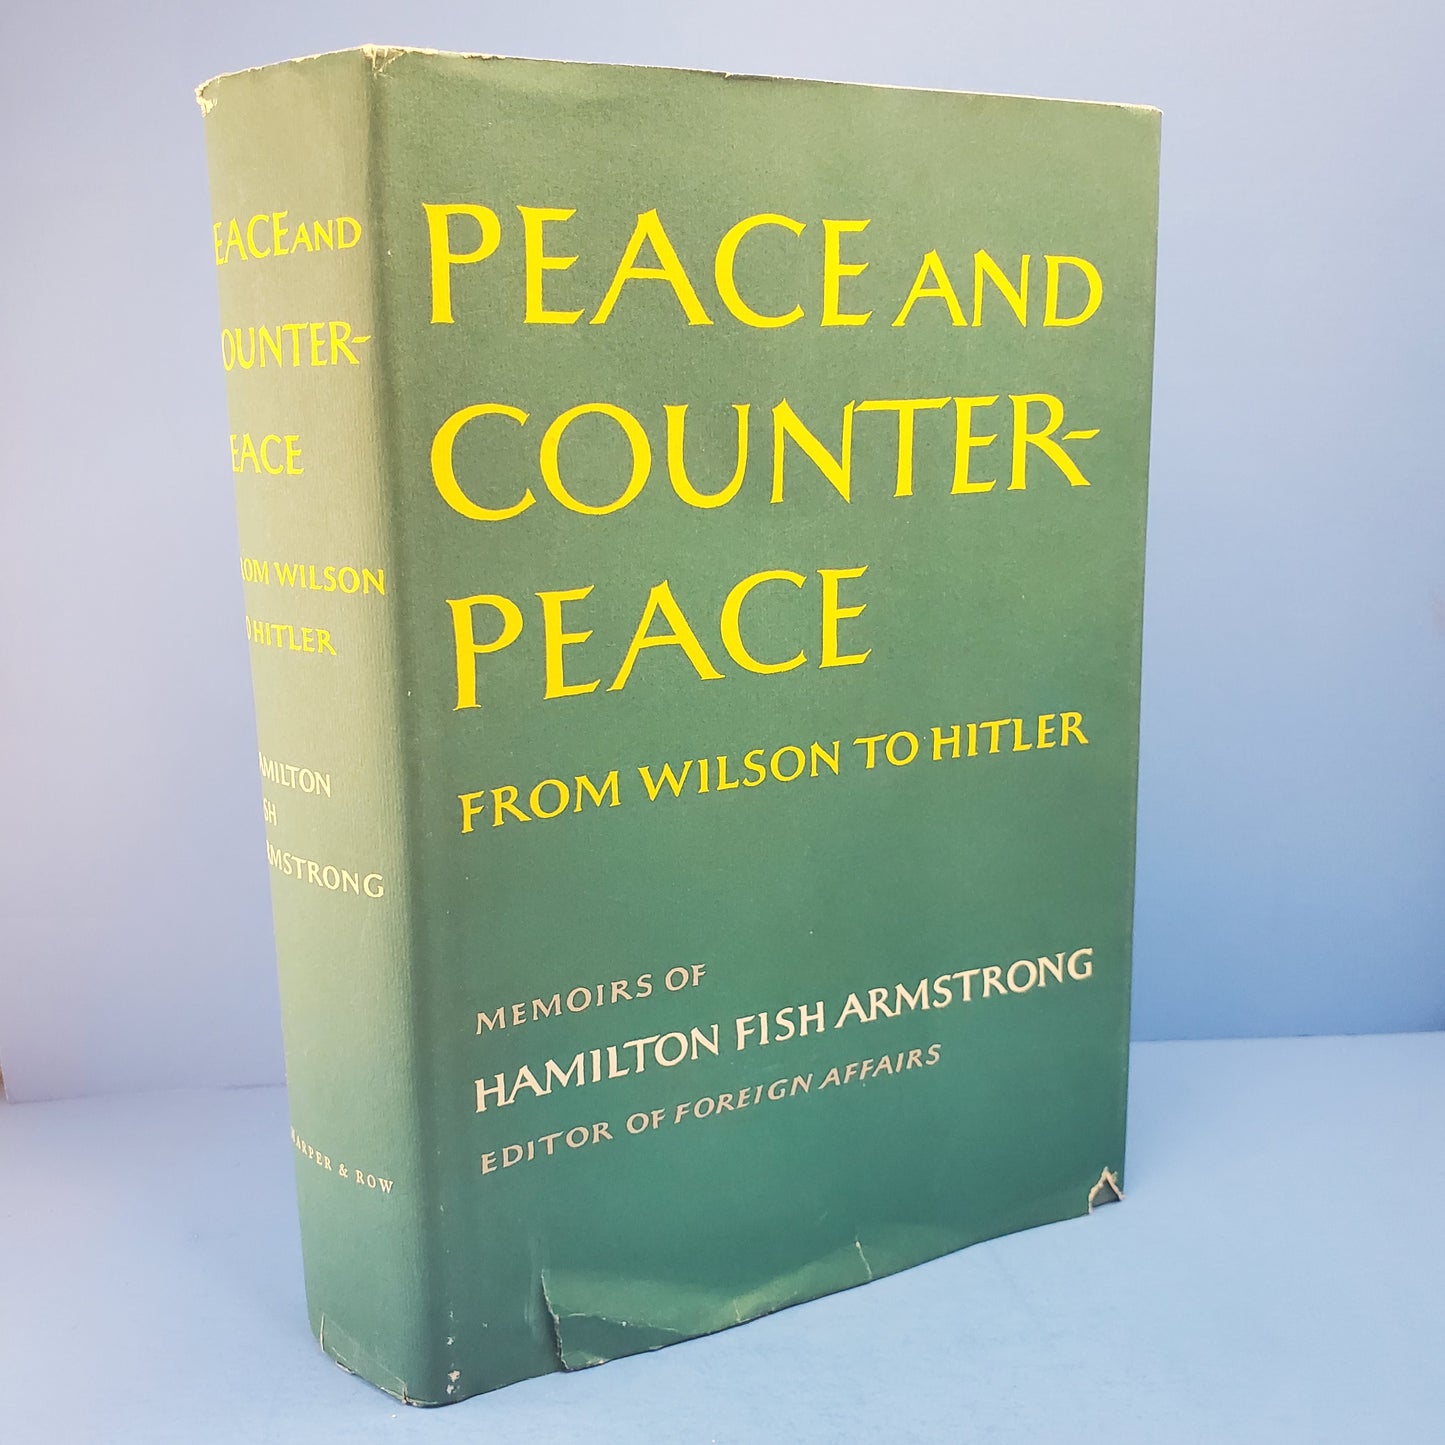 Peace and Counter-Peace: From Wilson to Hitler